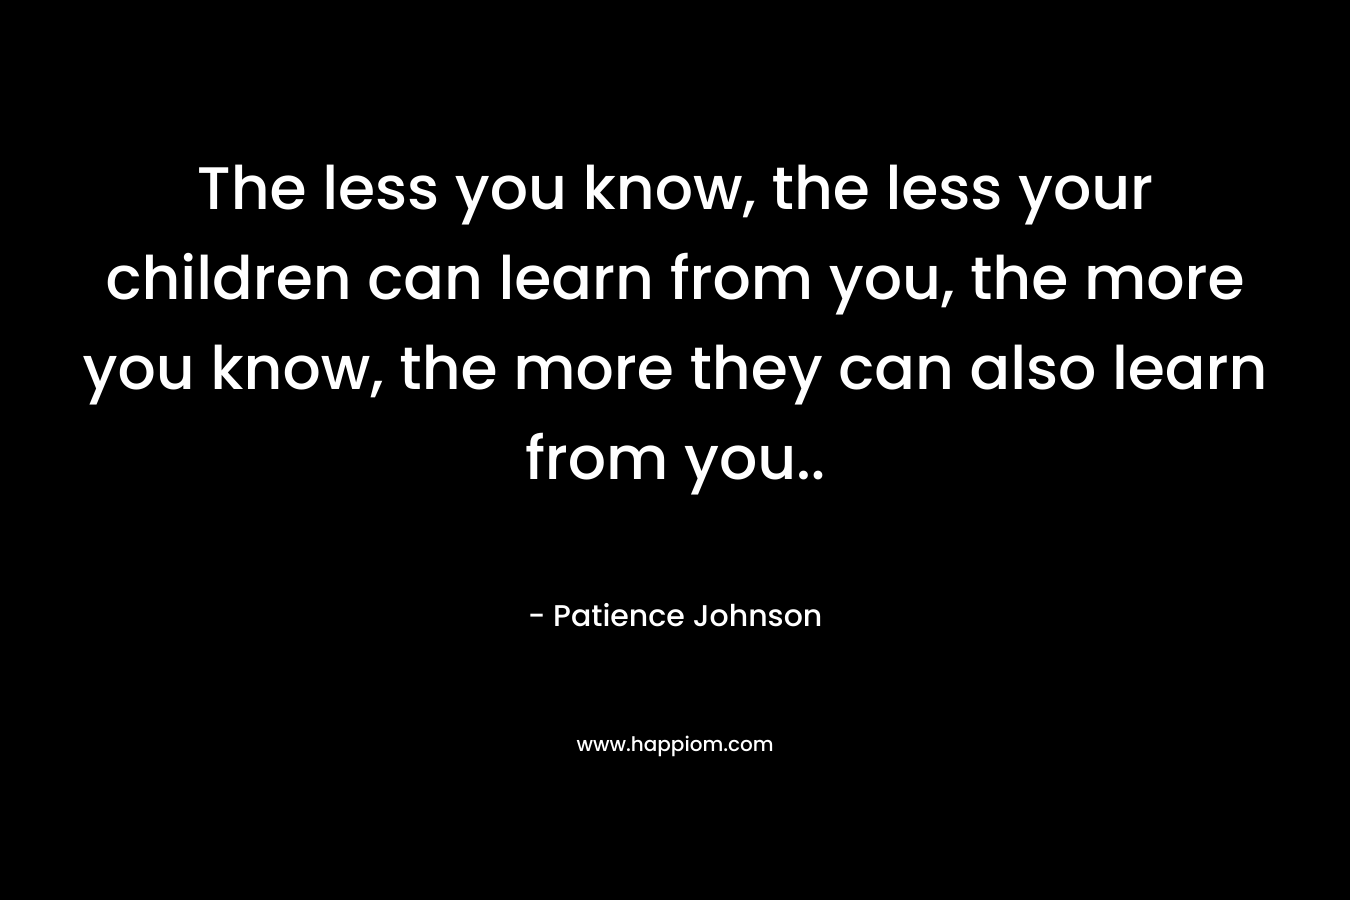 The less you know, the less your children can learn from you, the more you know, the more they can also learn from you..